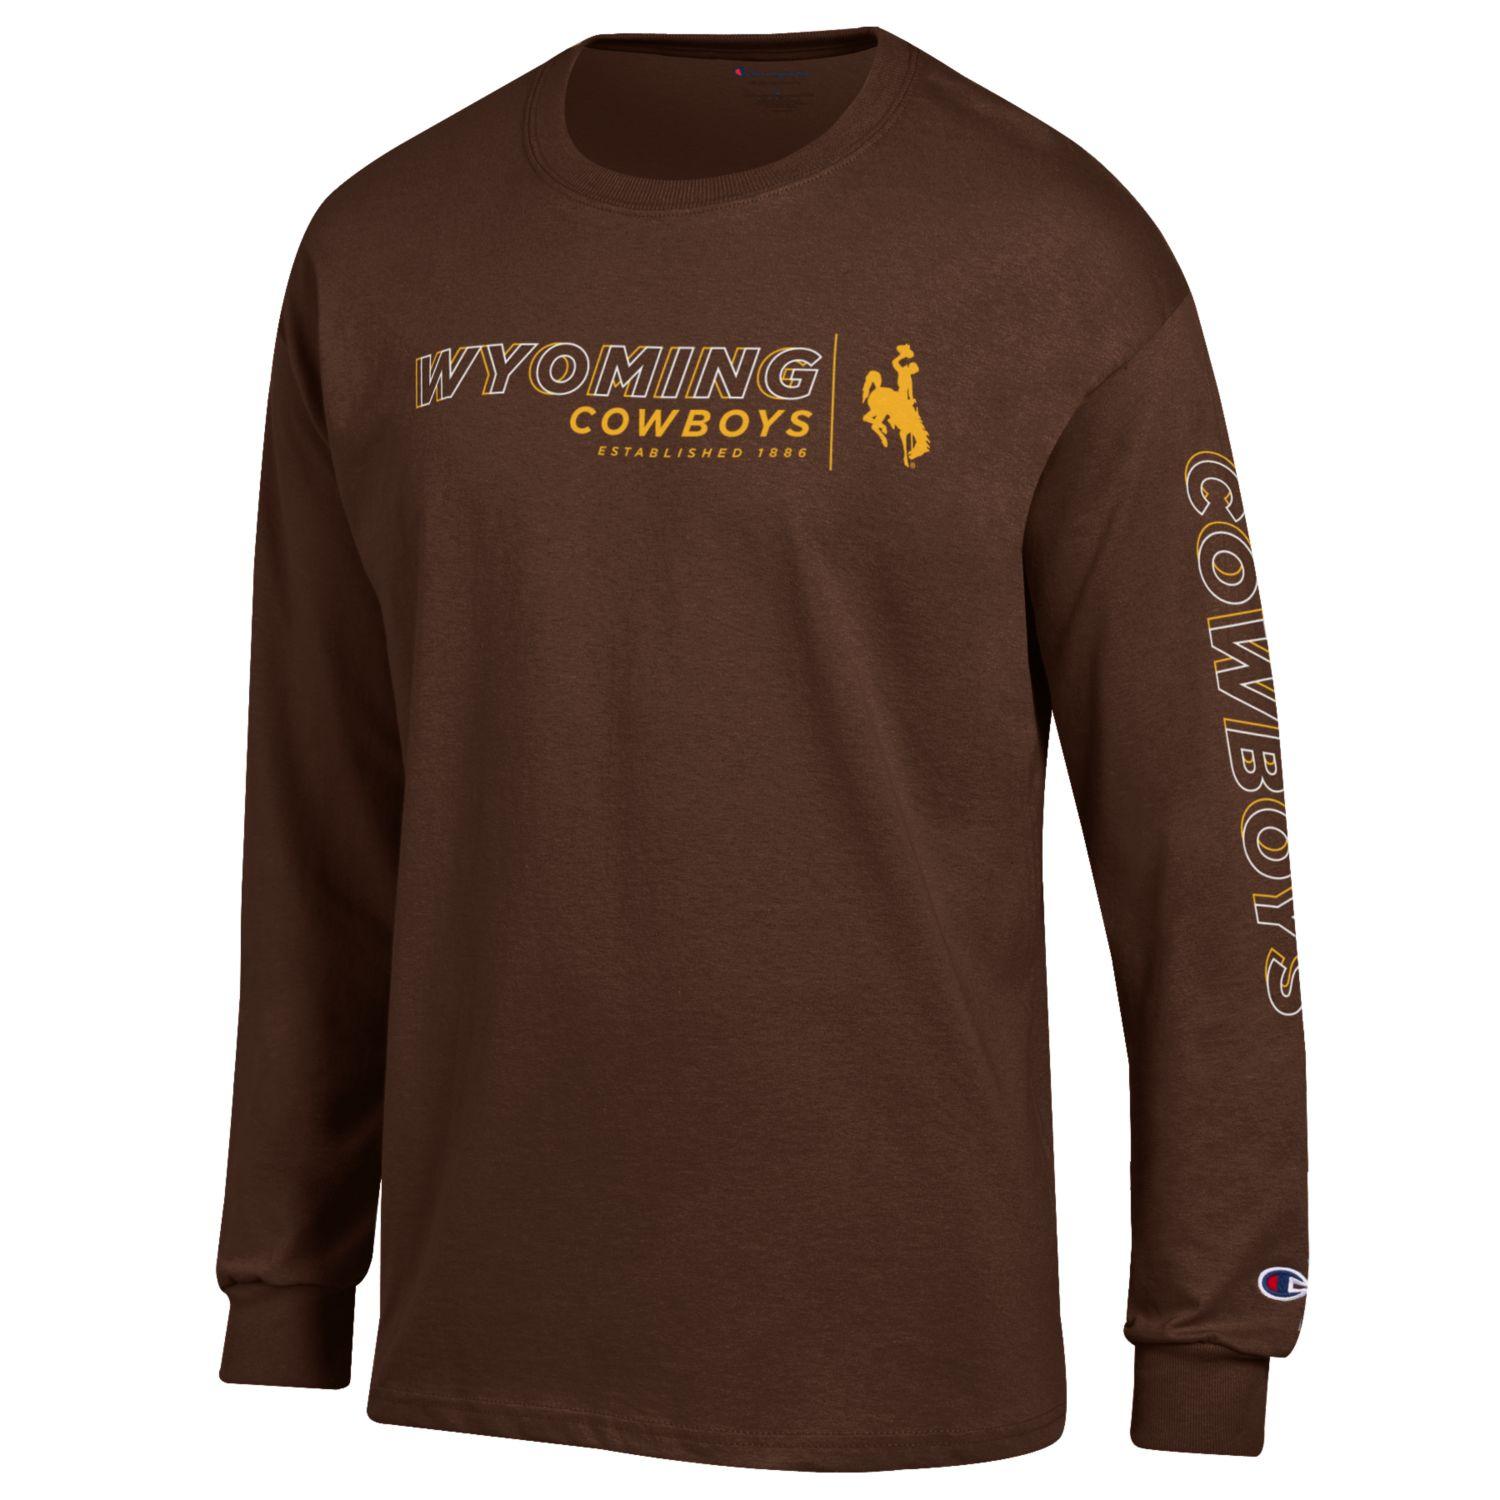 Wyoming Cowboys Jersey L/S Tee - Brown